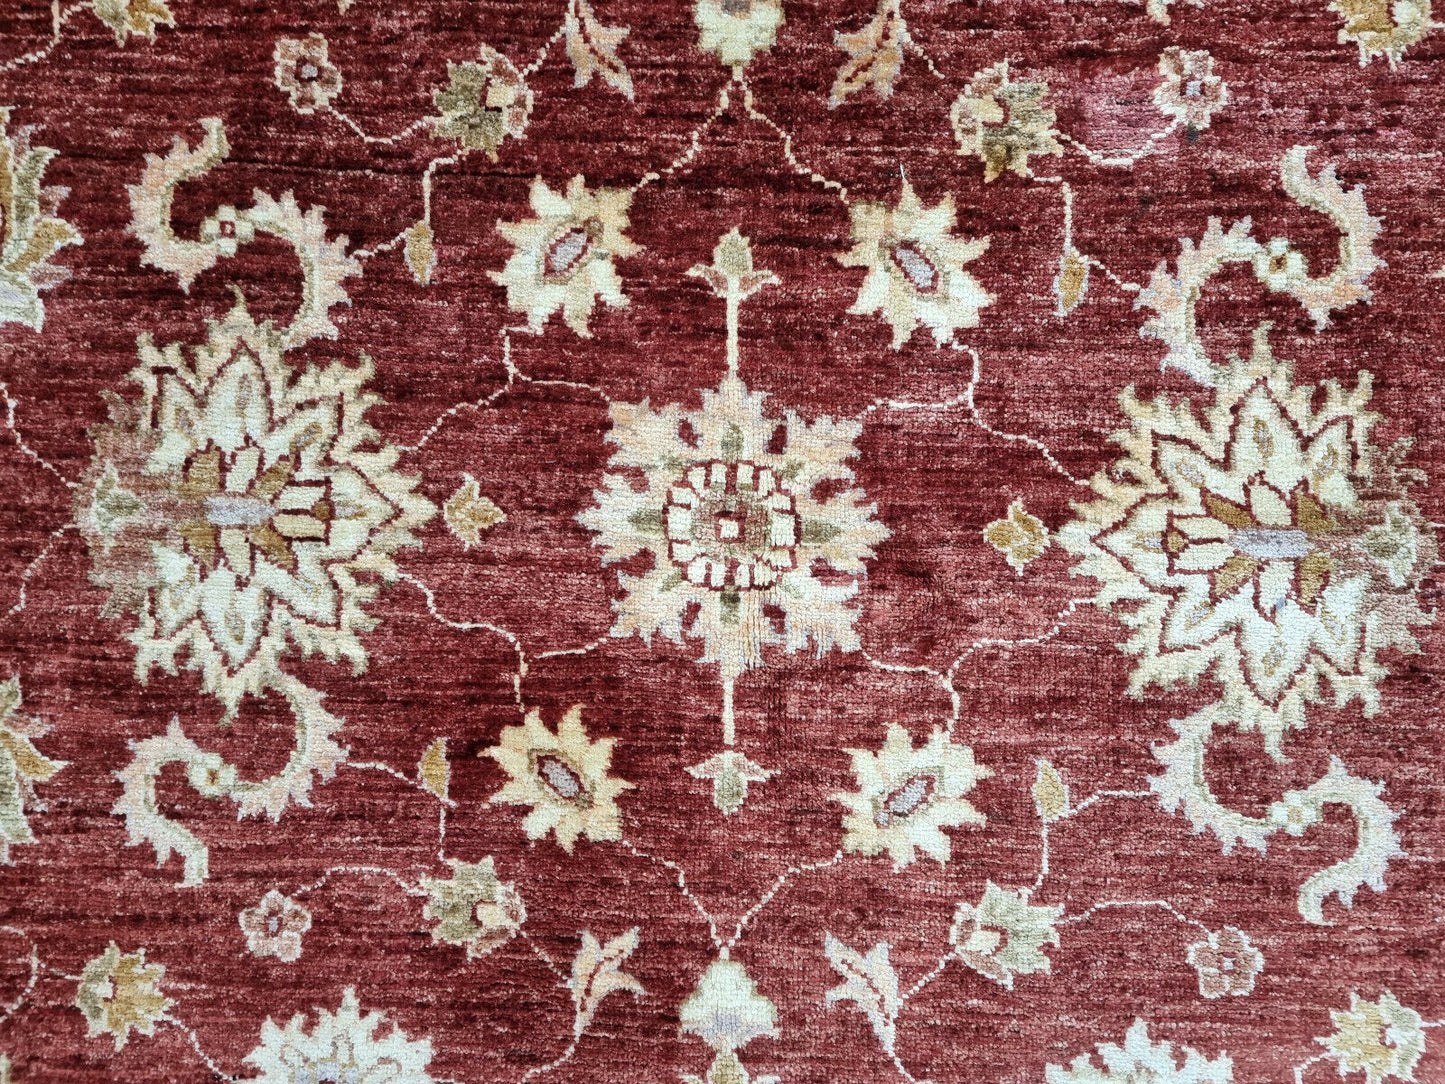 Close-up of cream, red, and green tones on Handmade Vintage Afghan Zigler Rug - Detailed view showcasing the color palette of the rug's borders.